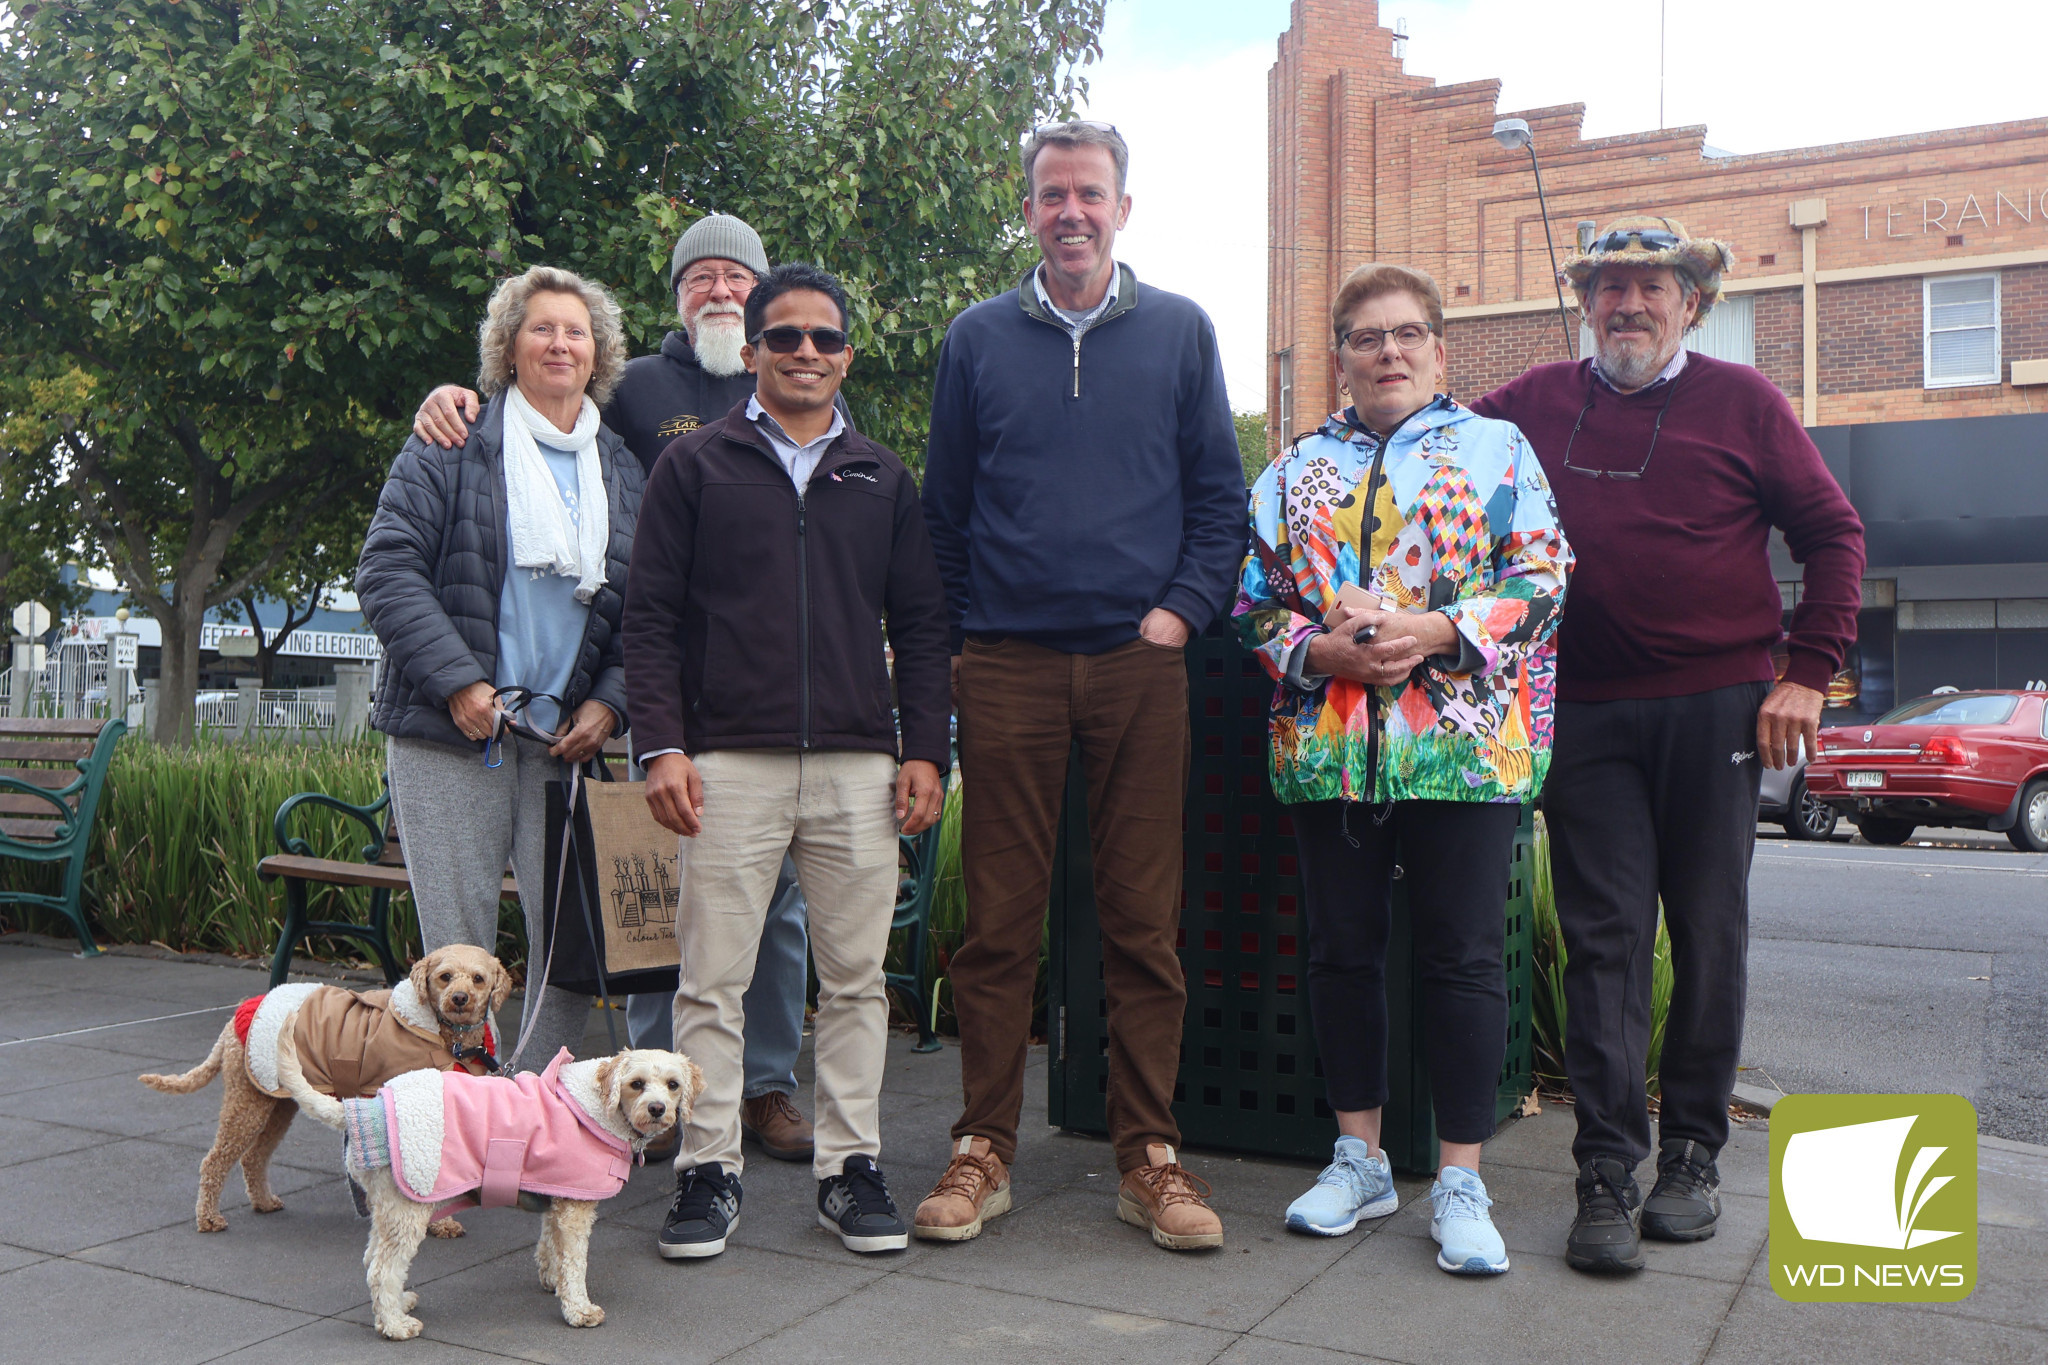 Issues raised: Wannon MP Dan Tehan met with constituents in Terang last Friday to hear their concerns as part of a listening post tour across the electorate.